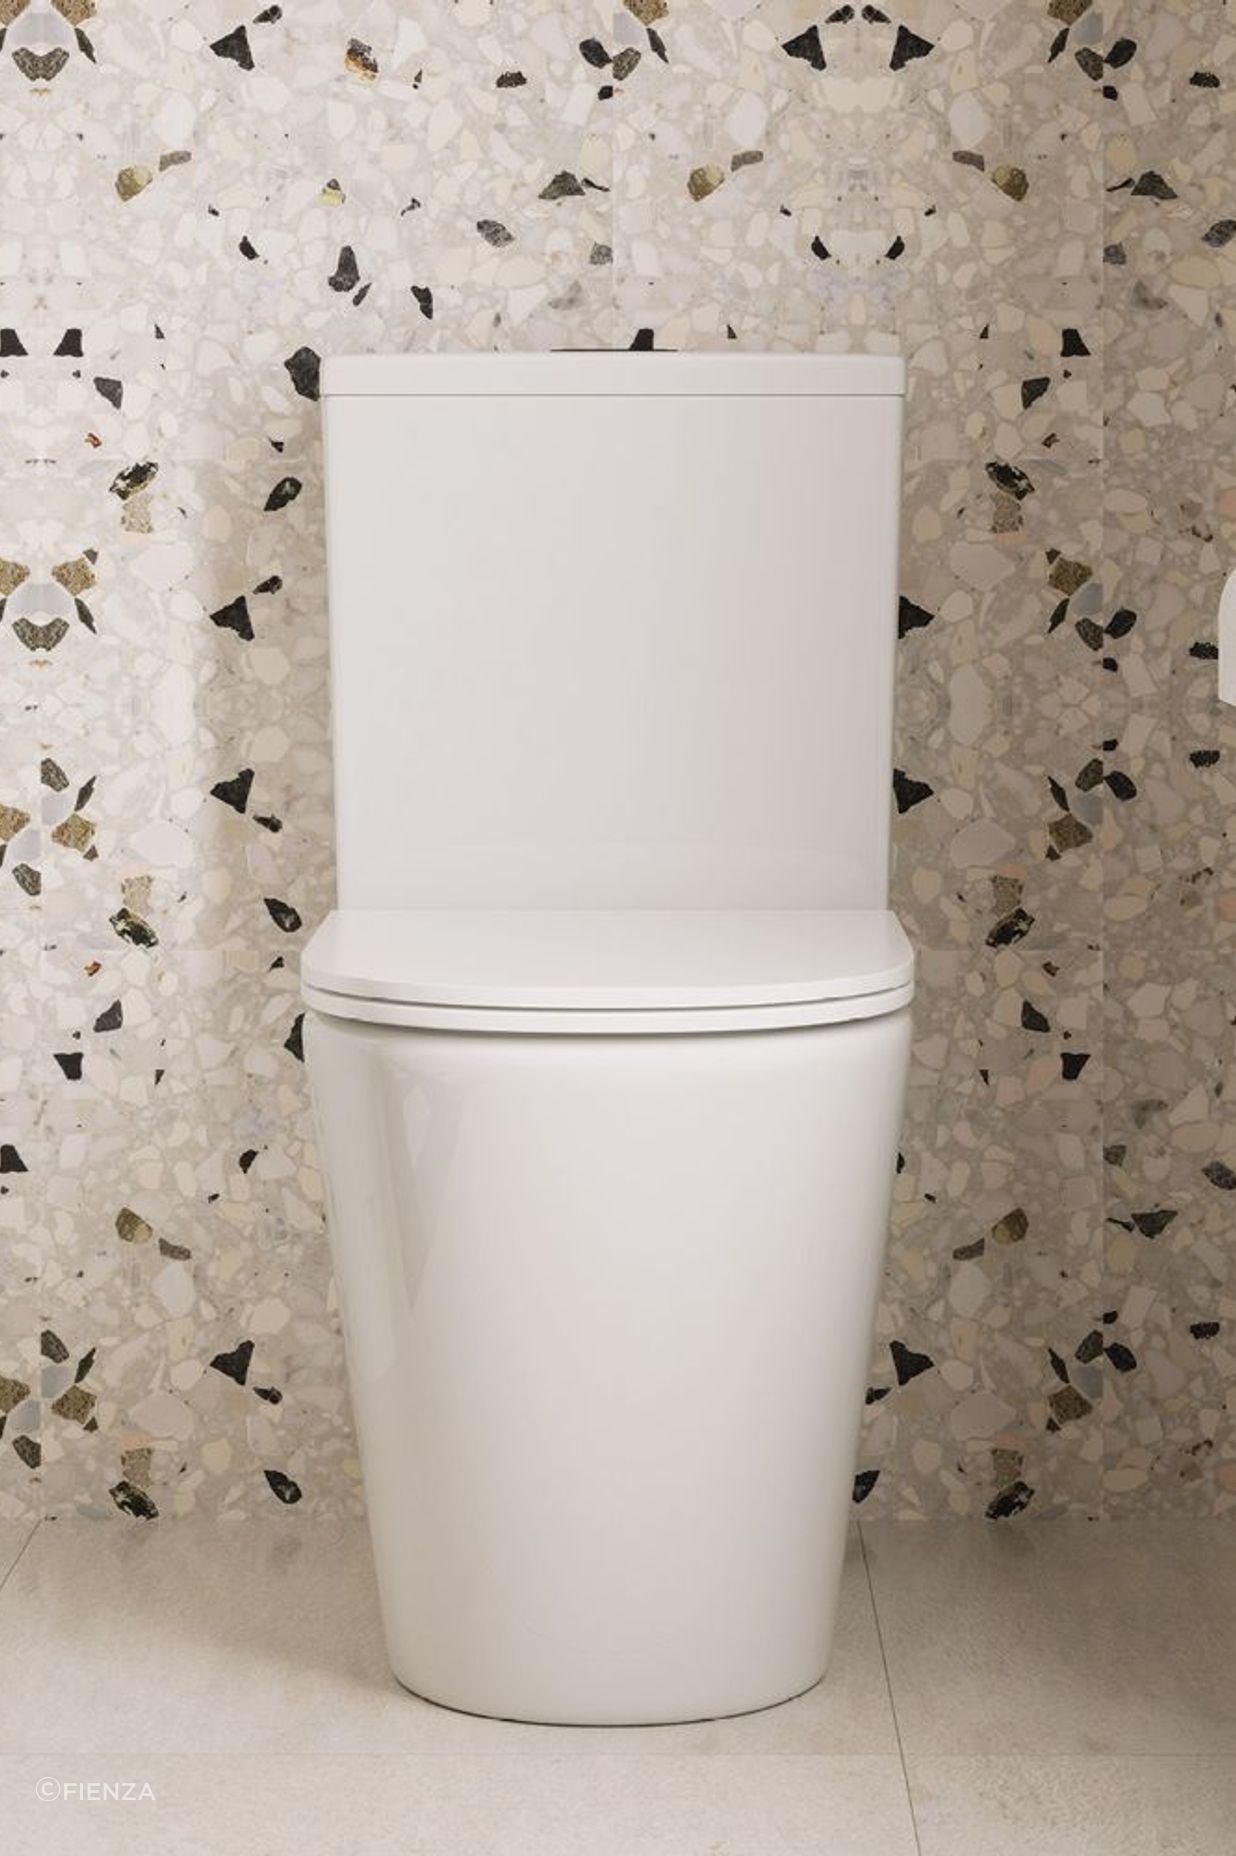 The Kaya Back-to-Wall Toilet Suite fits seamlessly in bathrooms of all sizes